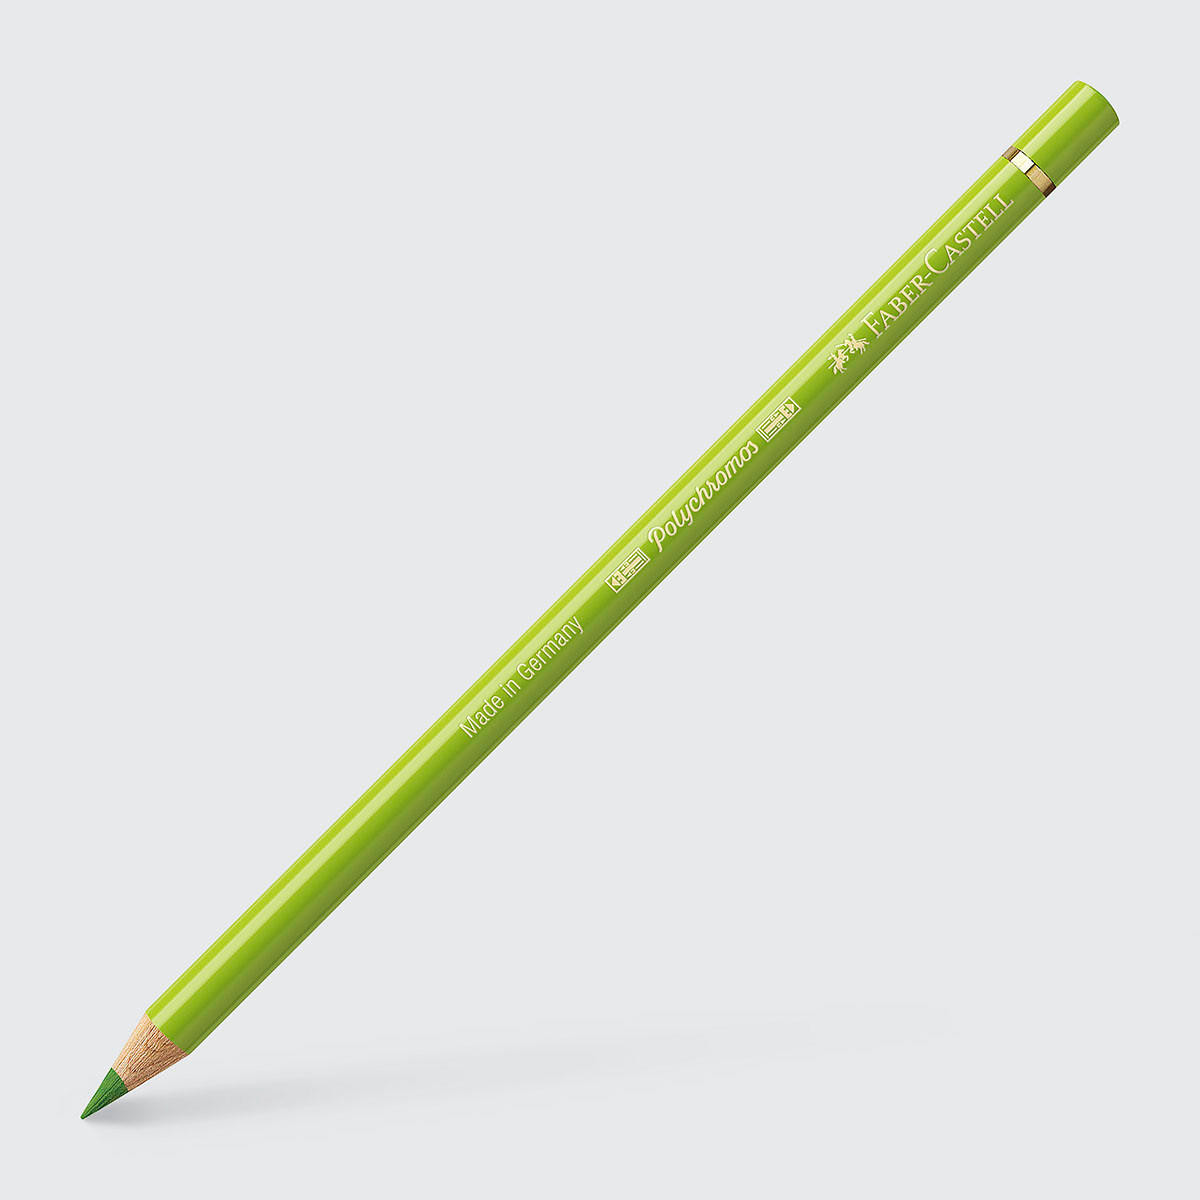 Faber-Castell Polychromos Artists’ Coloured Pencil One Size May Green (170)